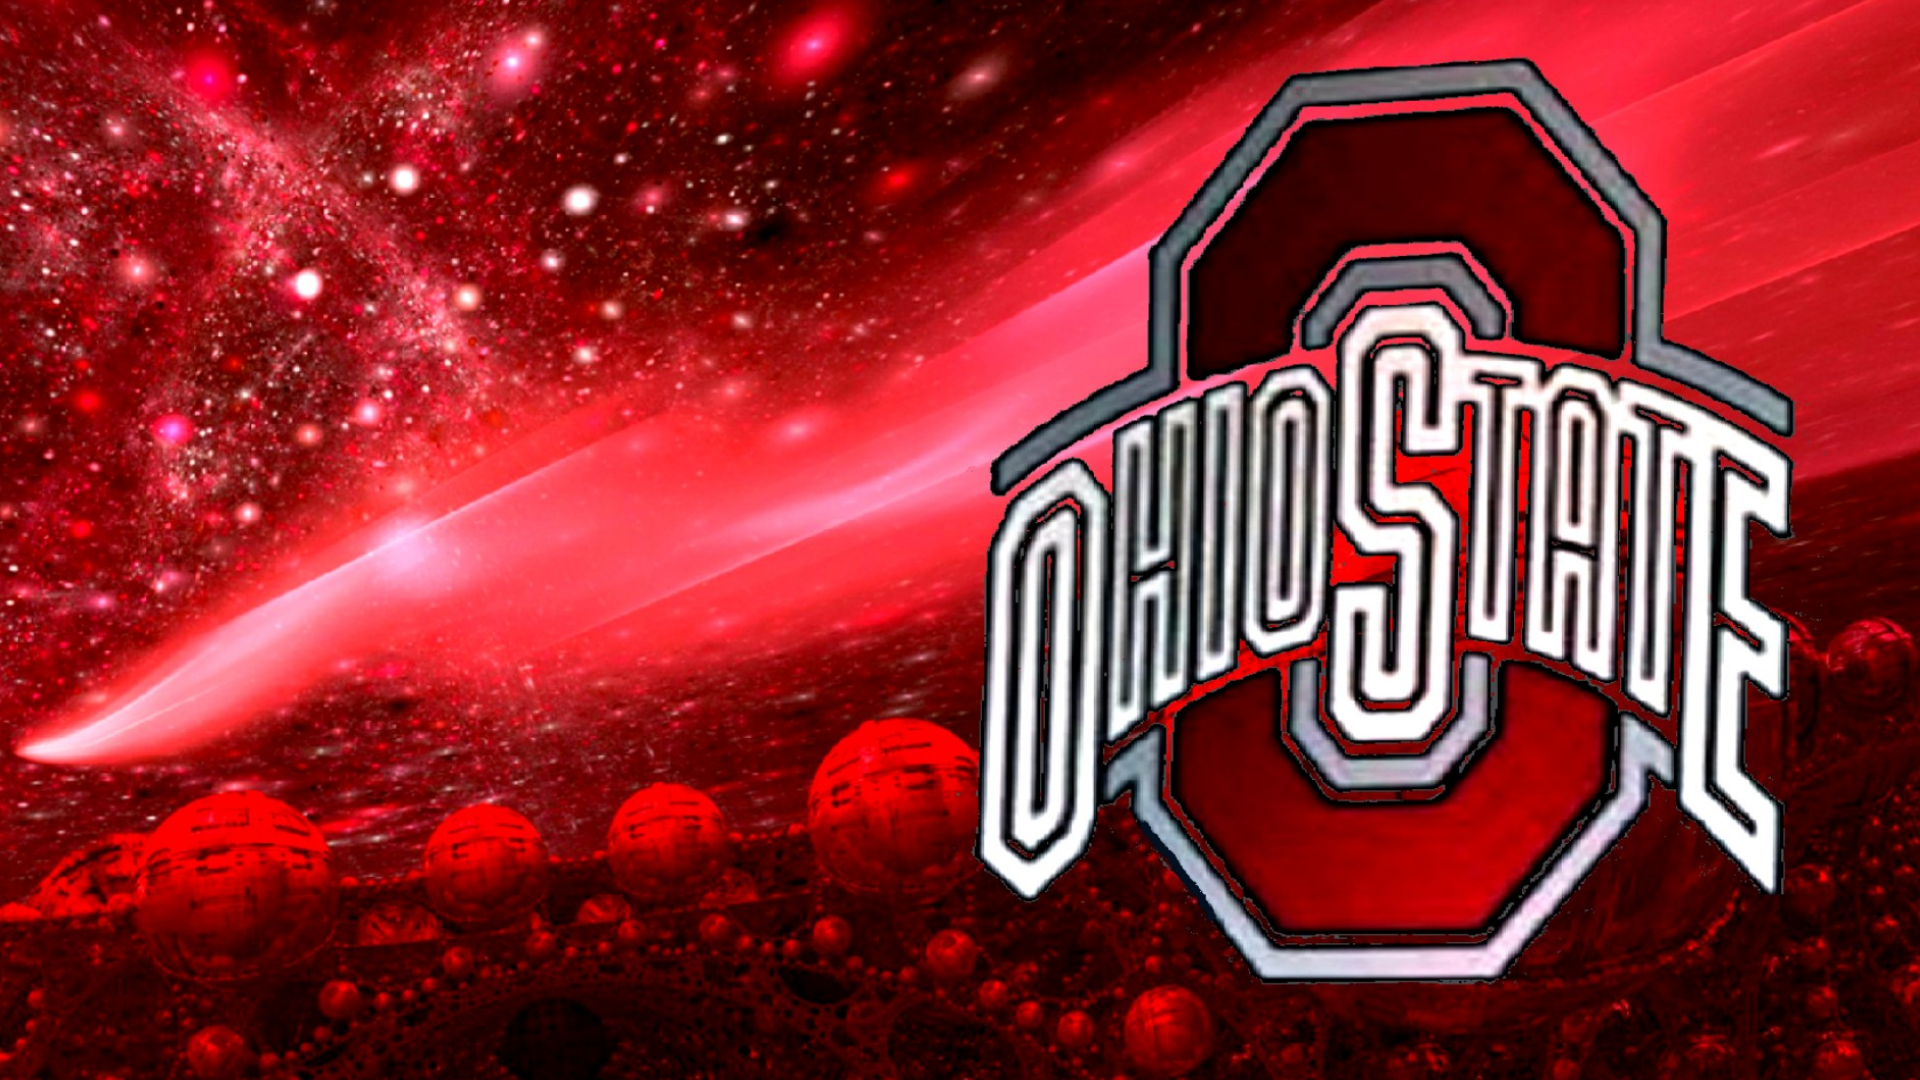 Free download 3D Ohio State Football Desktop and mobile wallpaper